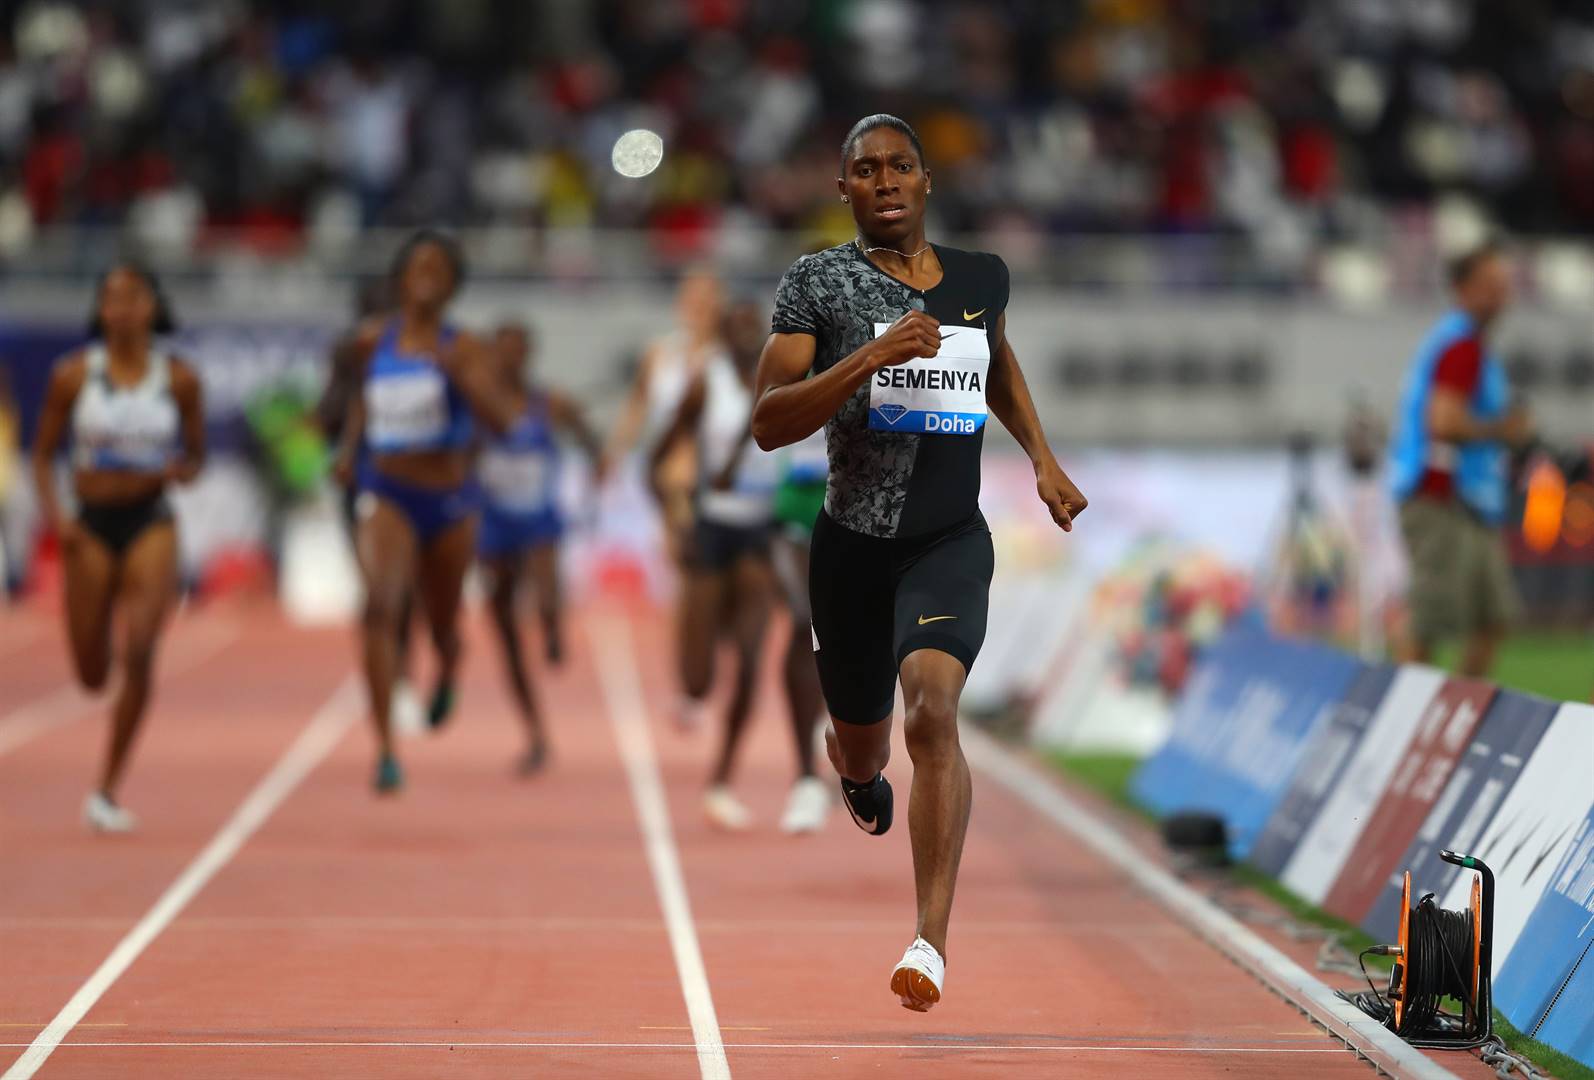 Caster Semenya could miss a considerable time on the track, and a significant loss in potential future earnings, due to her ongoing legal battle with the IAAF. Picture: Francois Nel/Getty Images